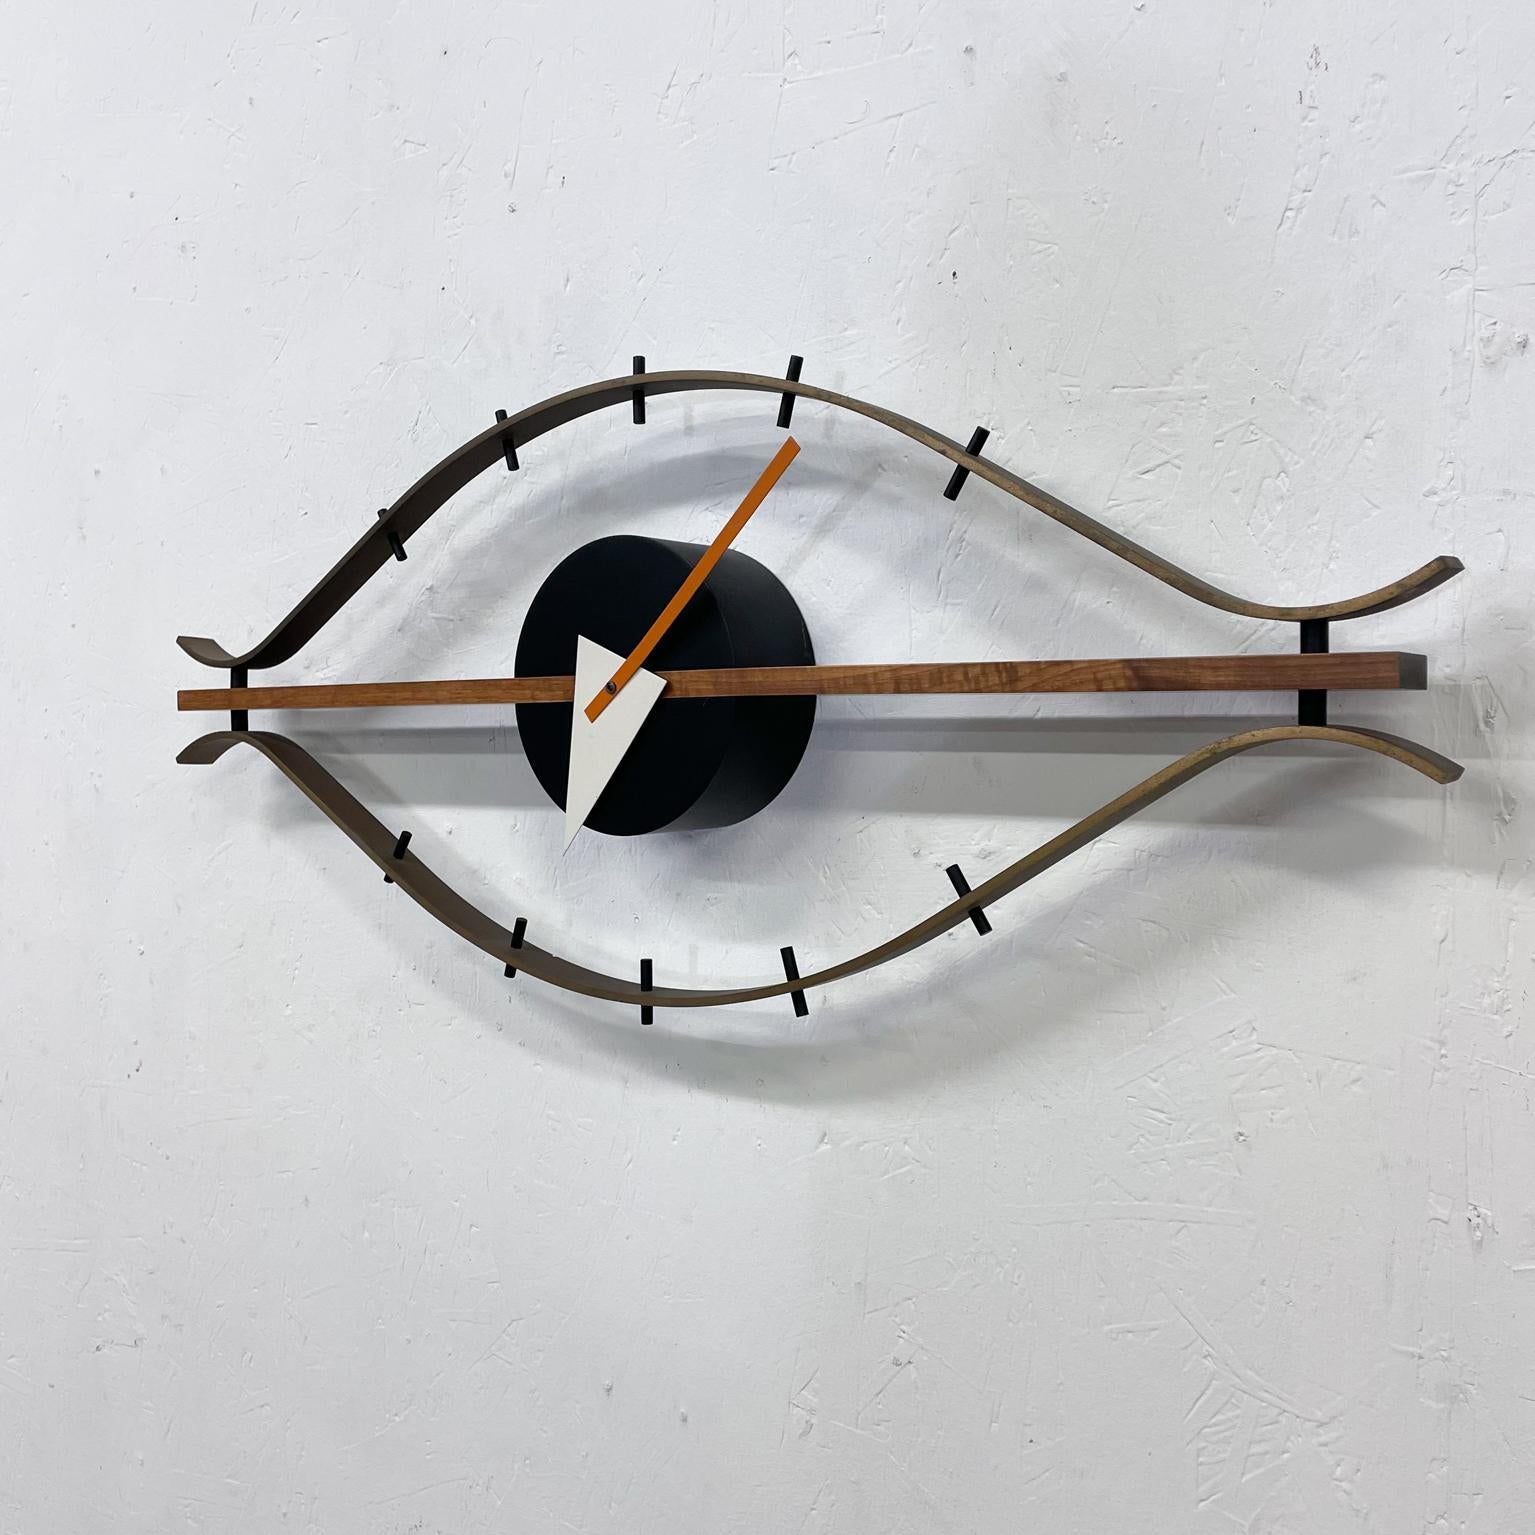 For your consideration: George Nelson modern Eye Clock 
Walnut wood and brass
Designed by George Nelson 1957 made in Germany
Vitra Re-Edition 2001 authorized Re edition maker label present
Vitra Design Museum presents a re-edition